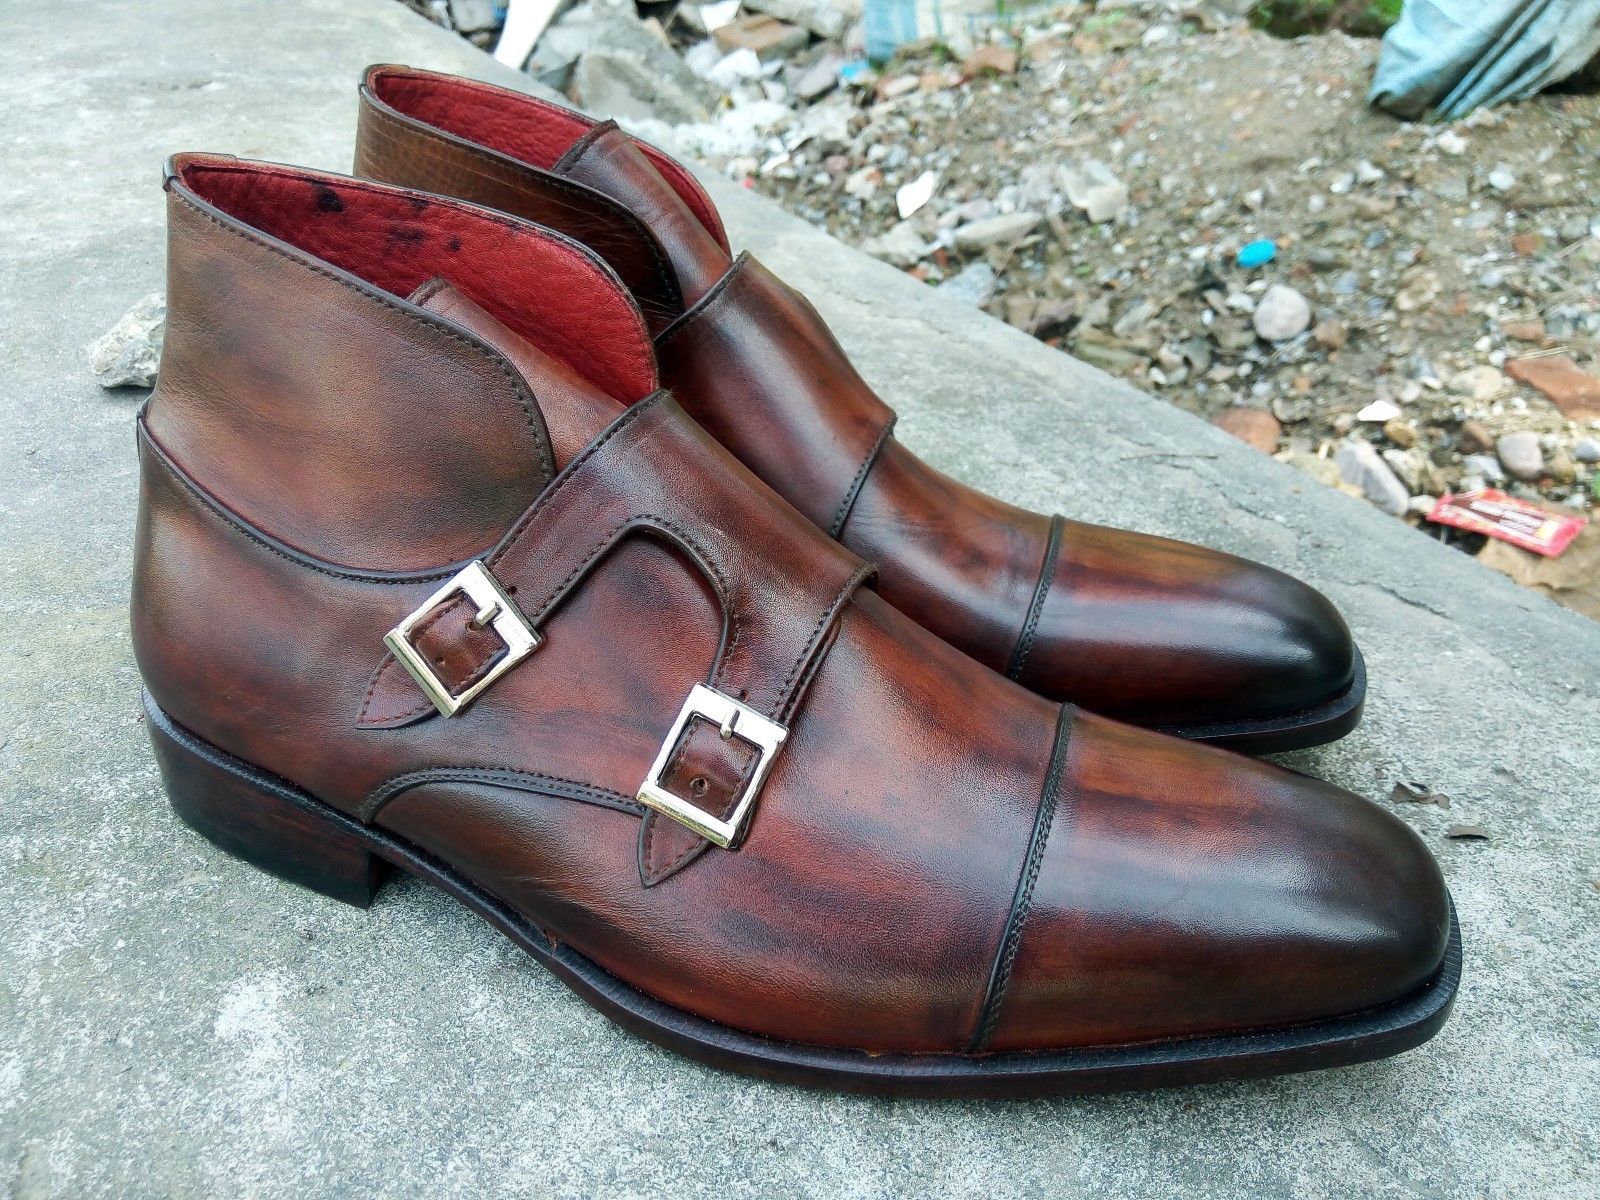 New Handmade Men Double Monk Brown Leather Boots, Formal Cap toe Dress ...